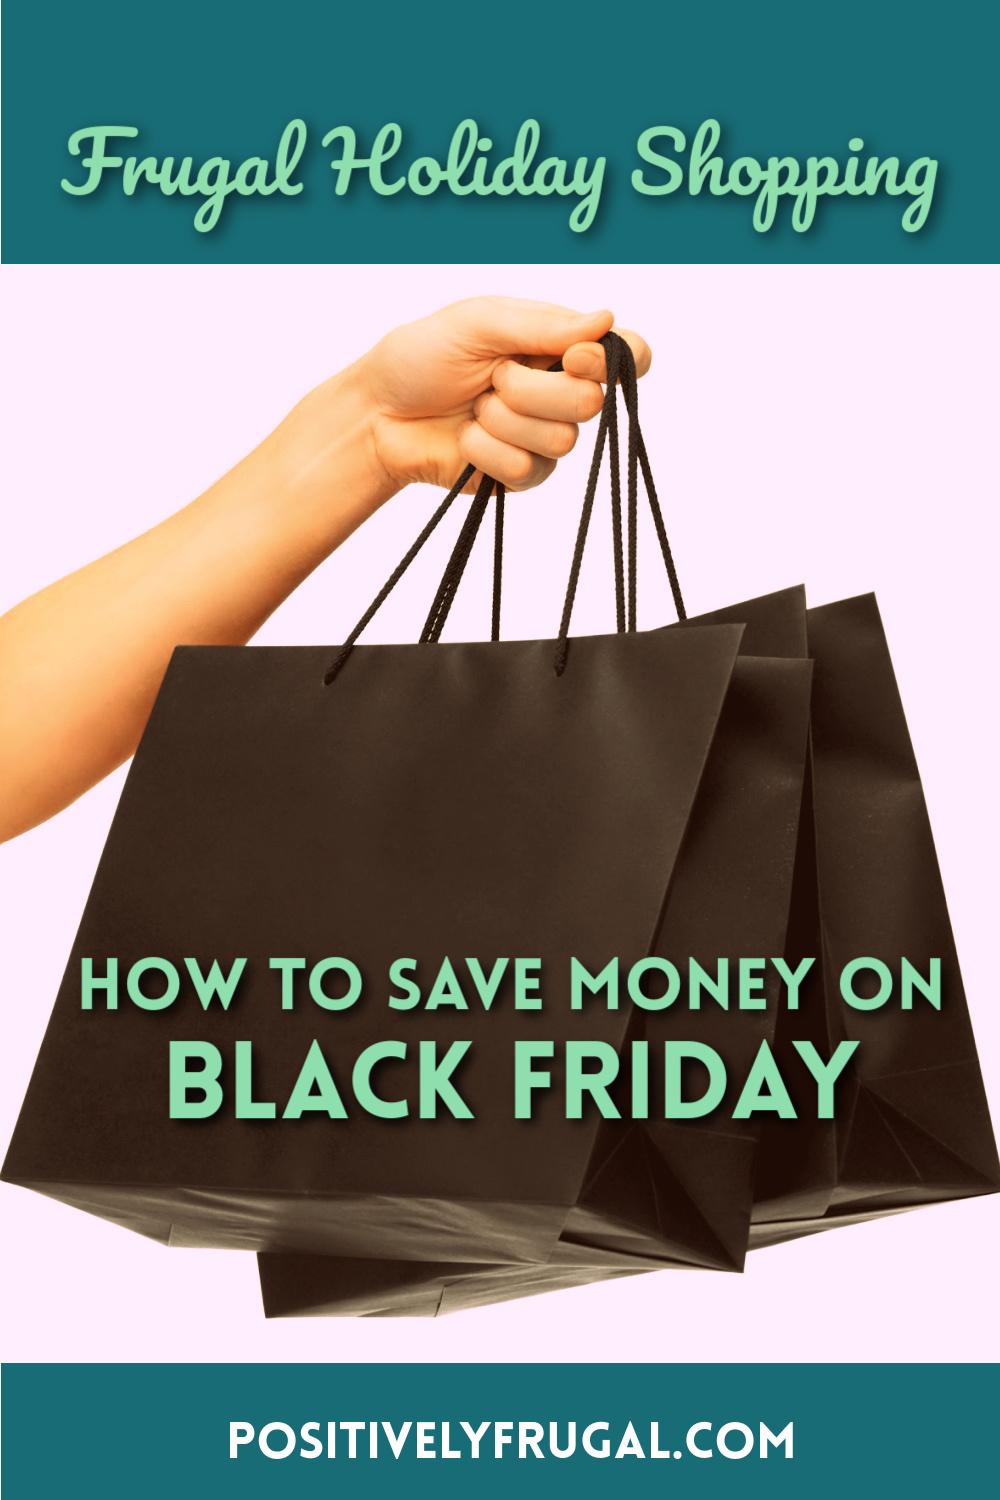 How To Save Money on Black Friday by PositivelyFrugal.com